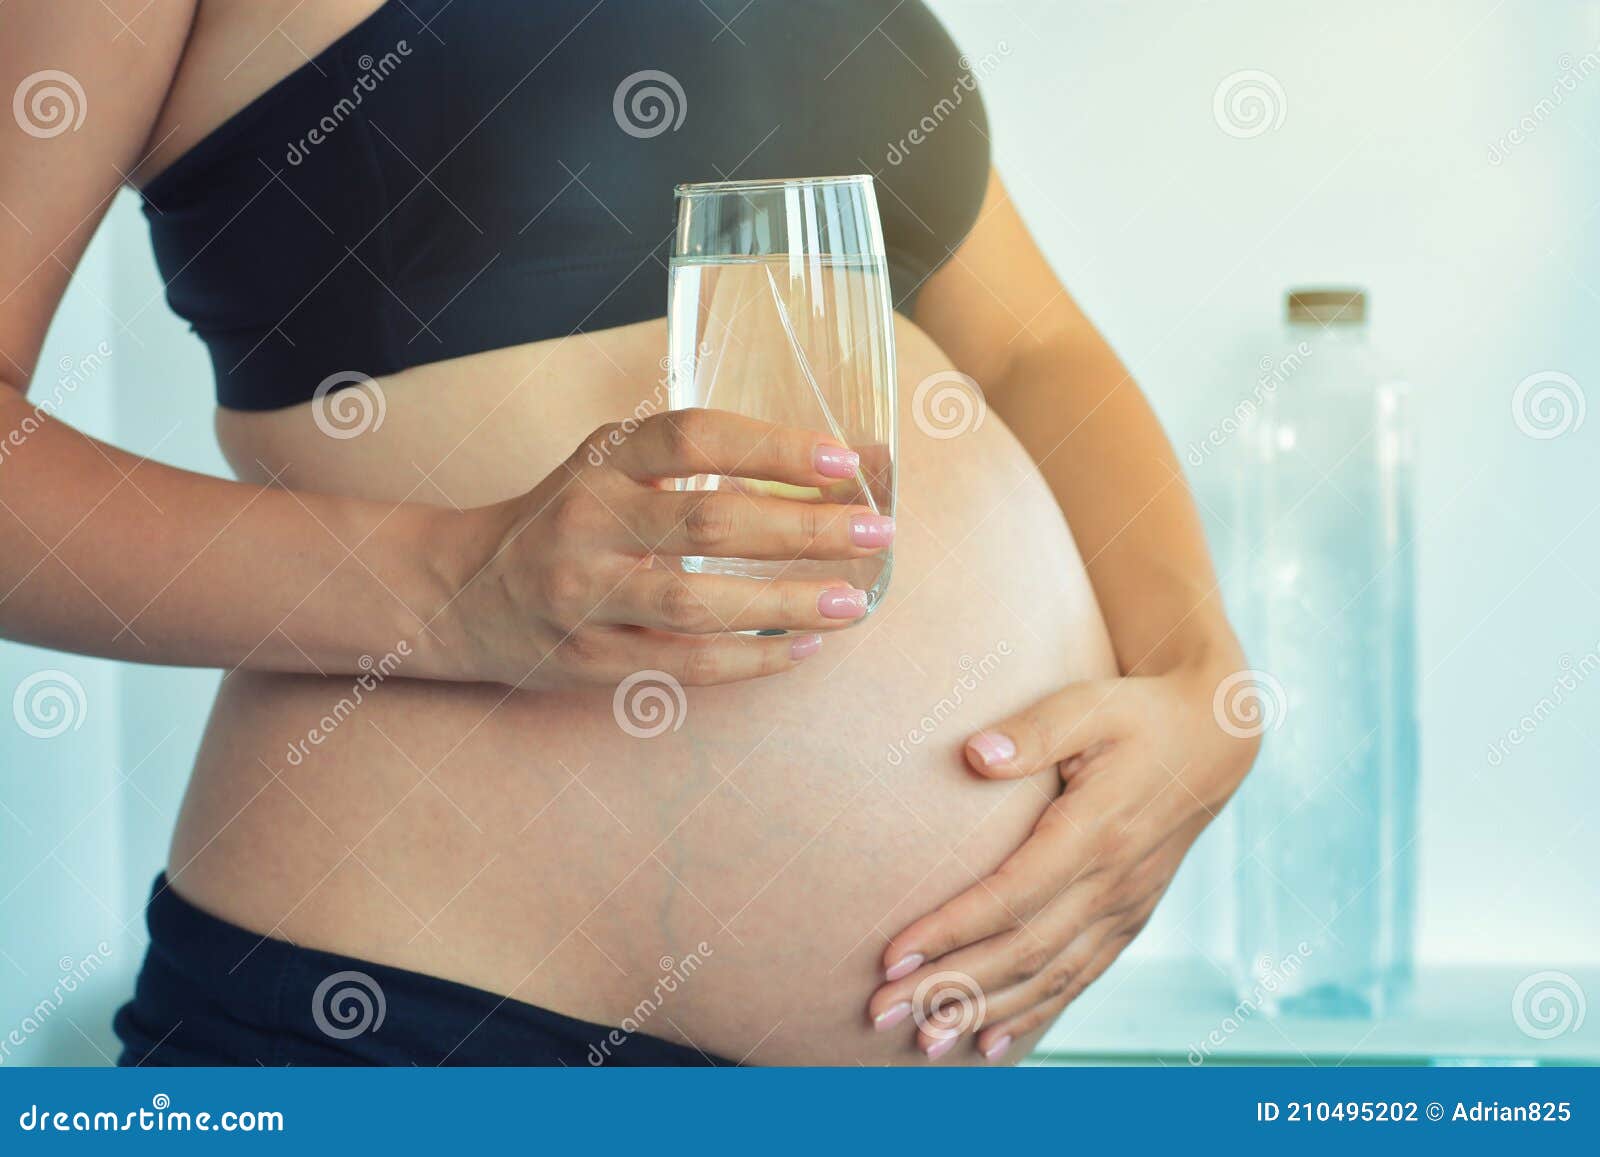 https://thumbs.dreamstime.com/z/pregnant-woman-belly-holding-glass-water-suggesting-importance-to-hydrate-pregnancy-months-pregnant-woman-belly-210495202.jpg